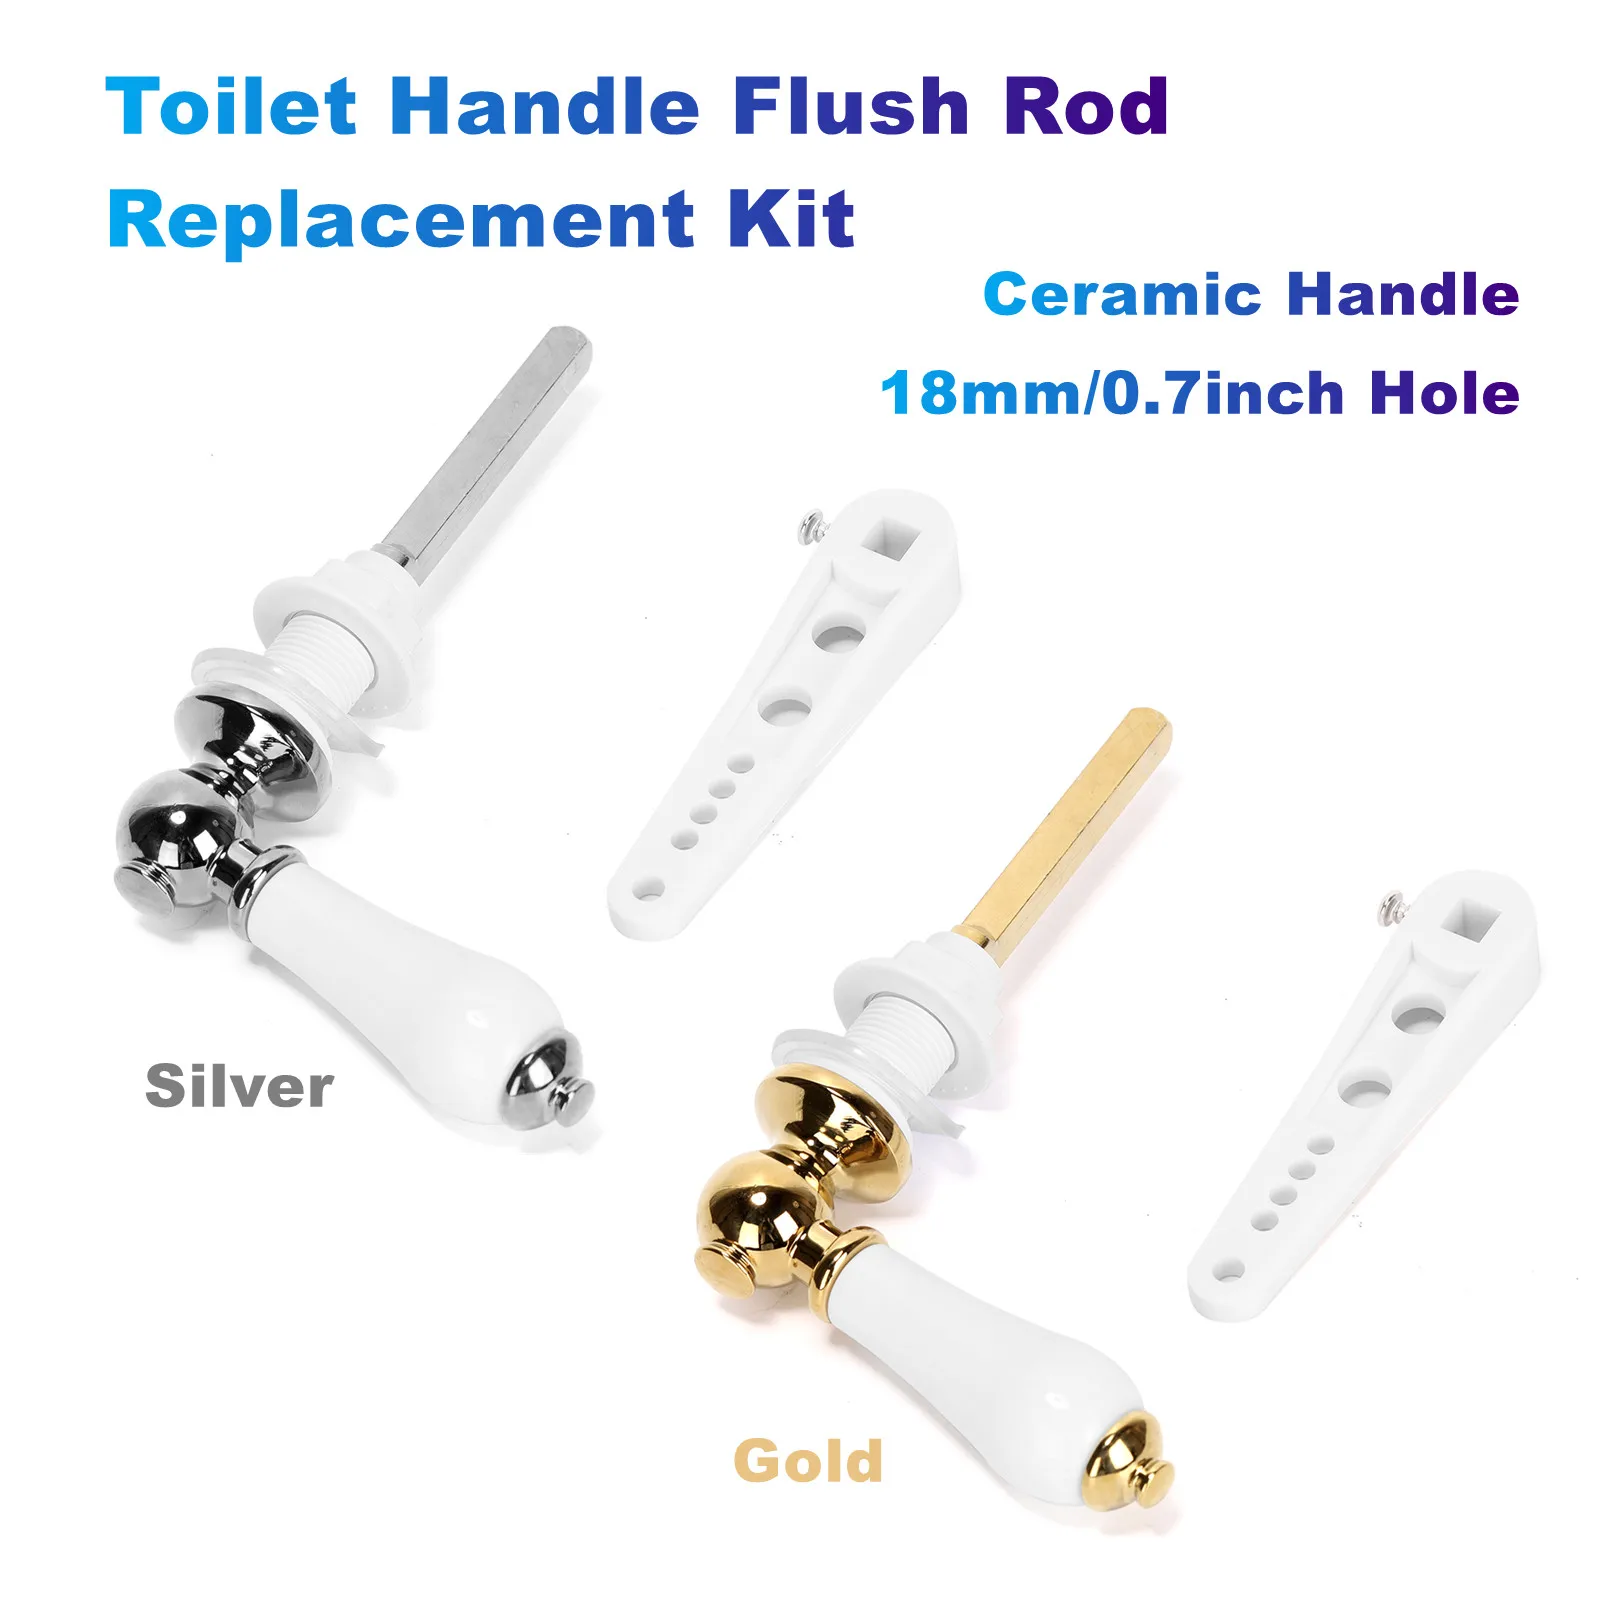 

Toilet Handle Flush Rod Replacement Kit Ceramic Pull Handle 18mm/0.7inch Hole (Silver/Gold) for Most Toilet Tank Lids